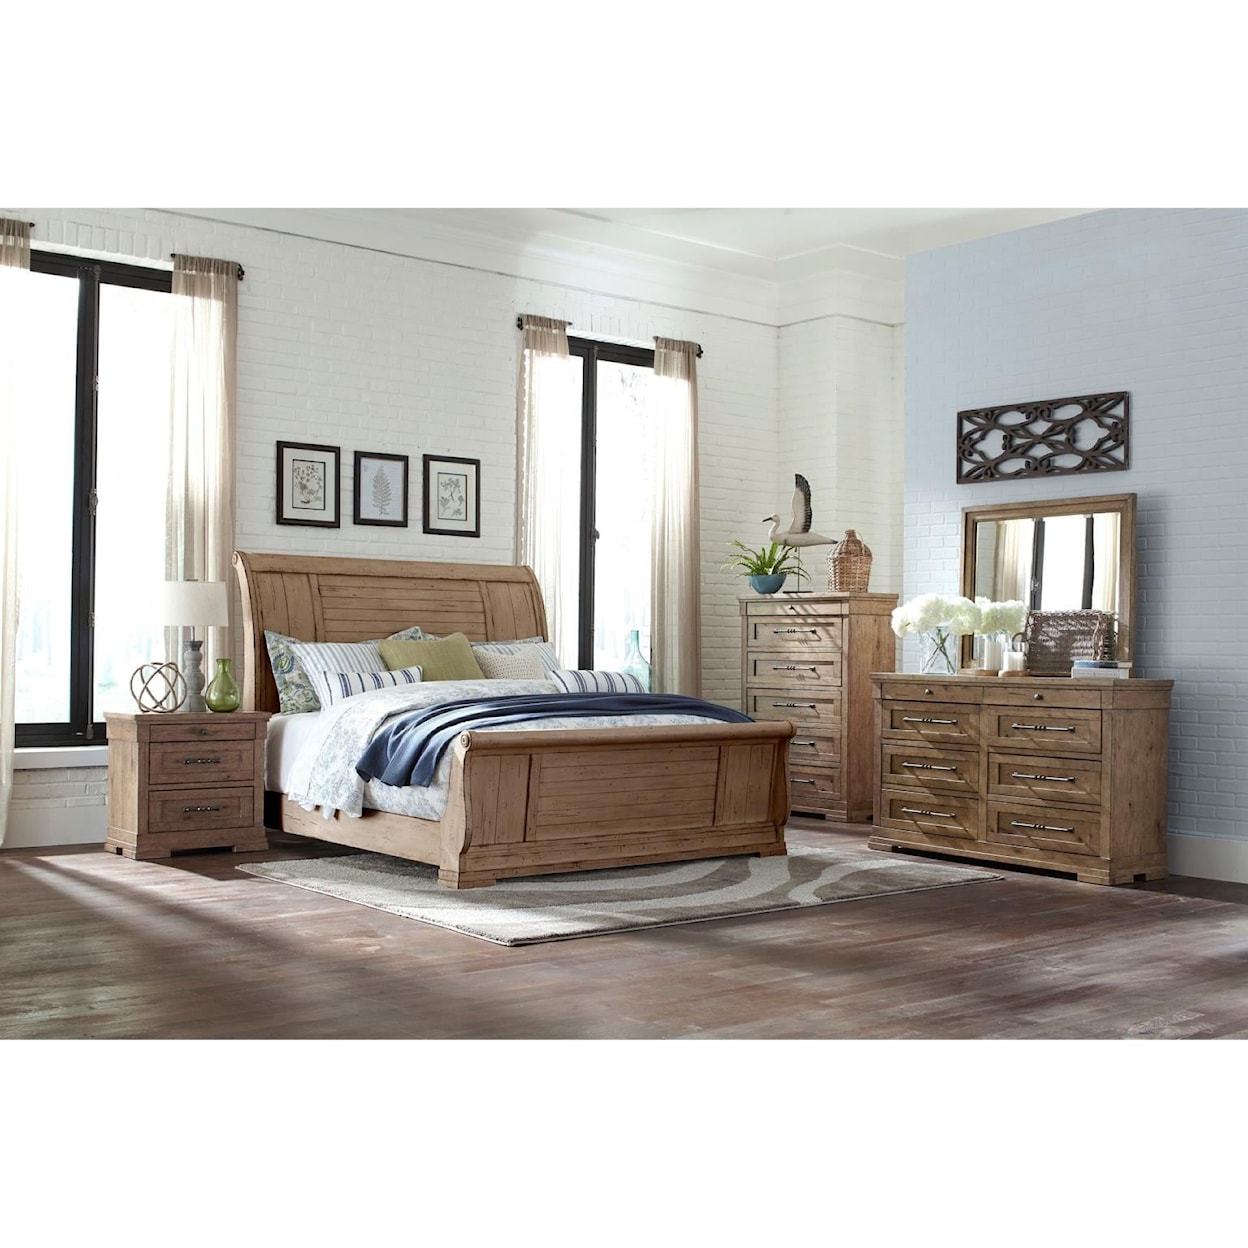 Trisha Yearwood Home Collection by Legacy Classic Coming Home 5-Piece Bedroom Set